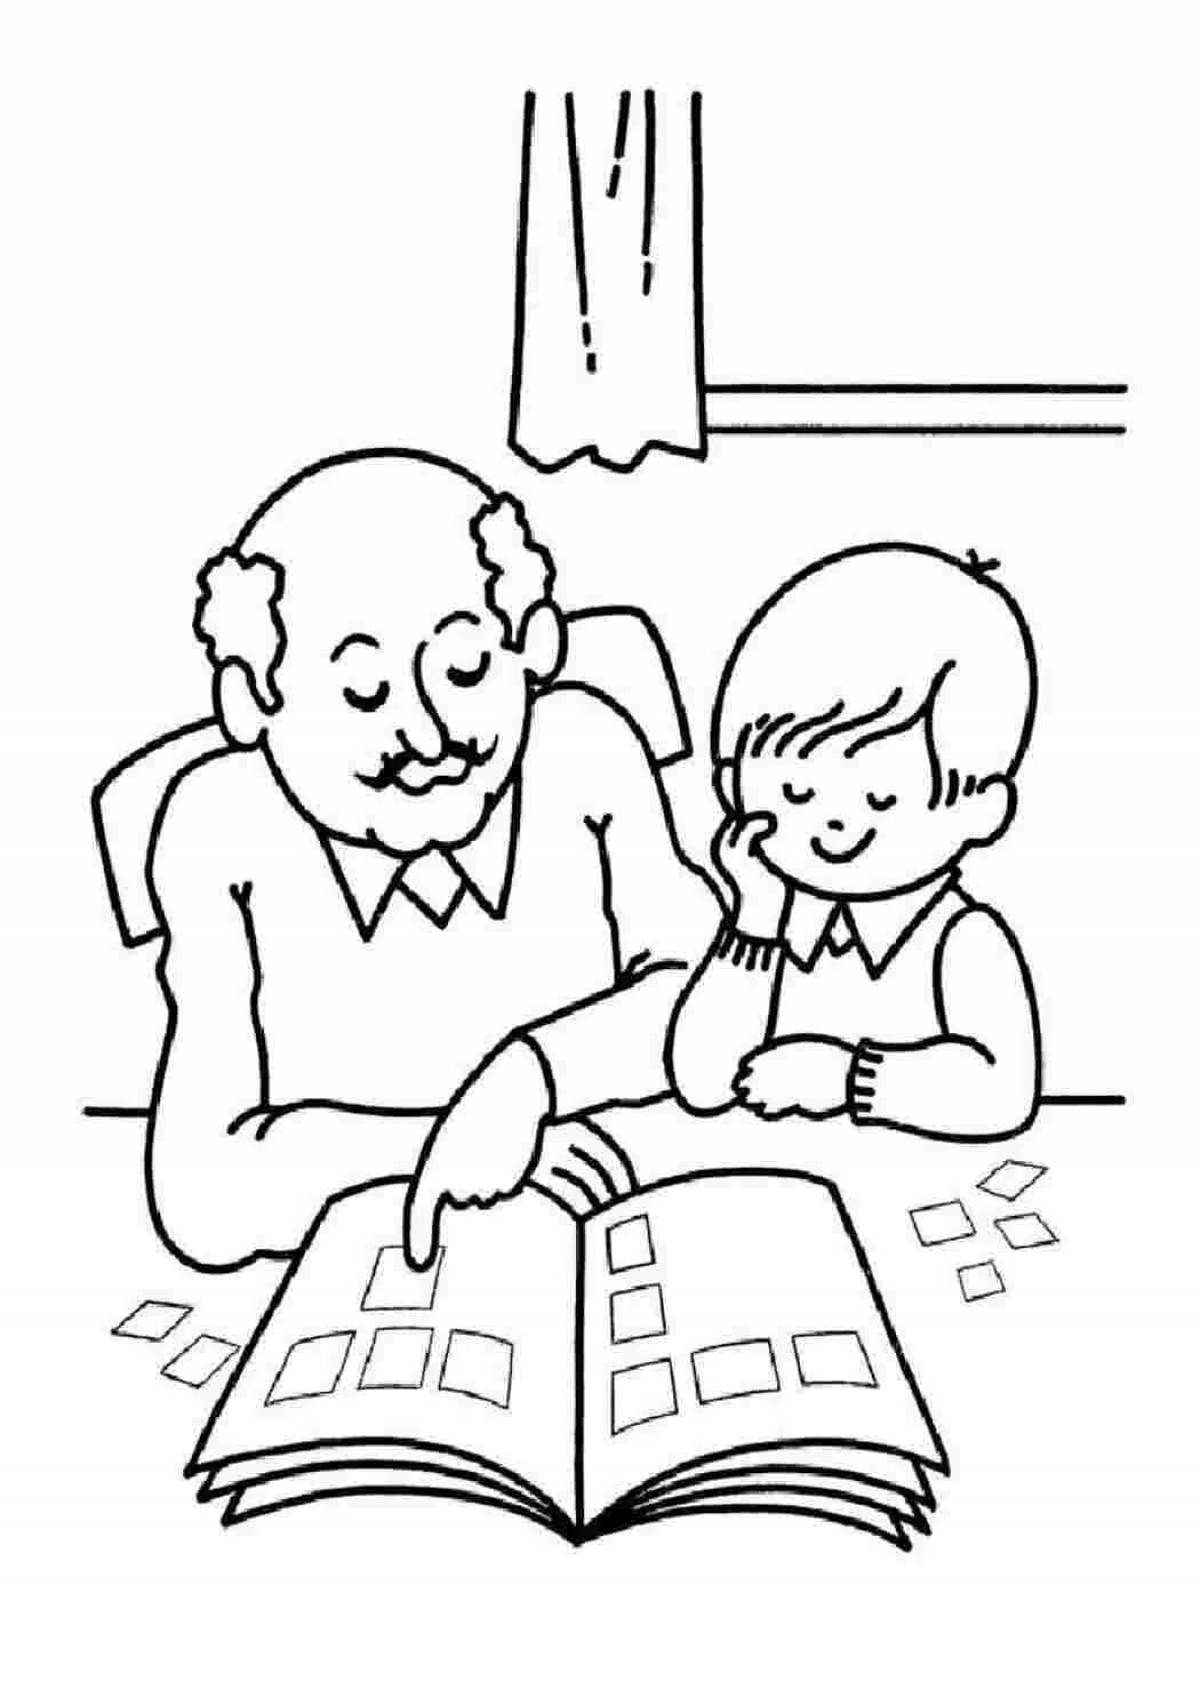 Incredible grandfather coloring book for kids